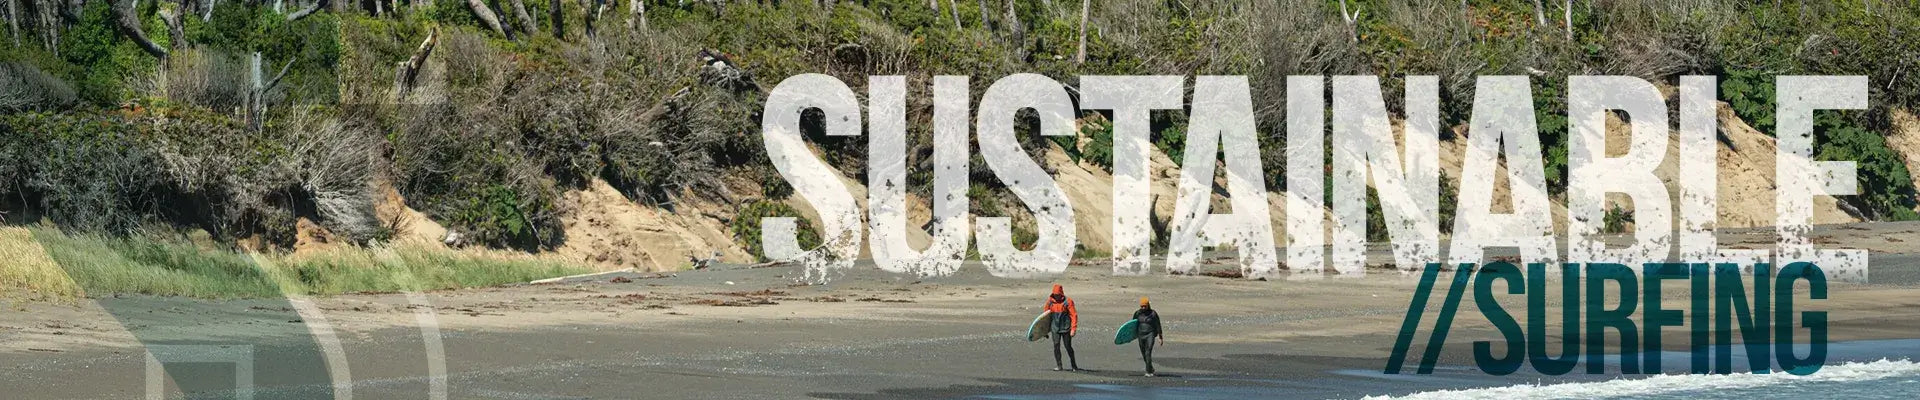 Sustainable Surfing